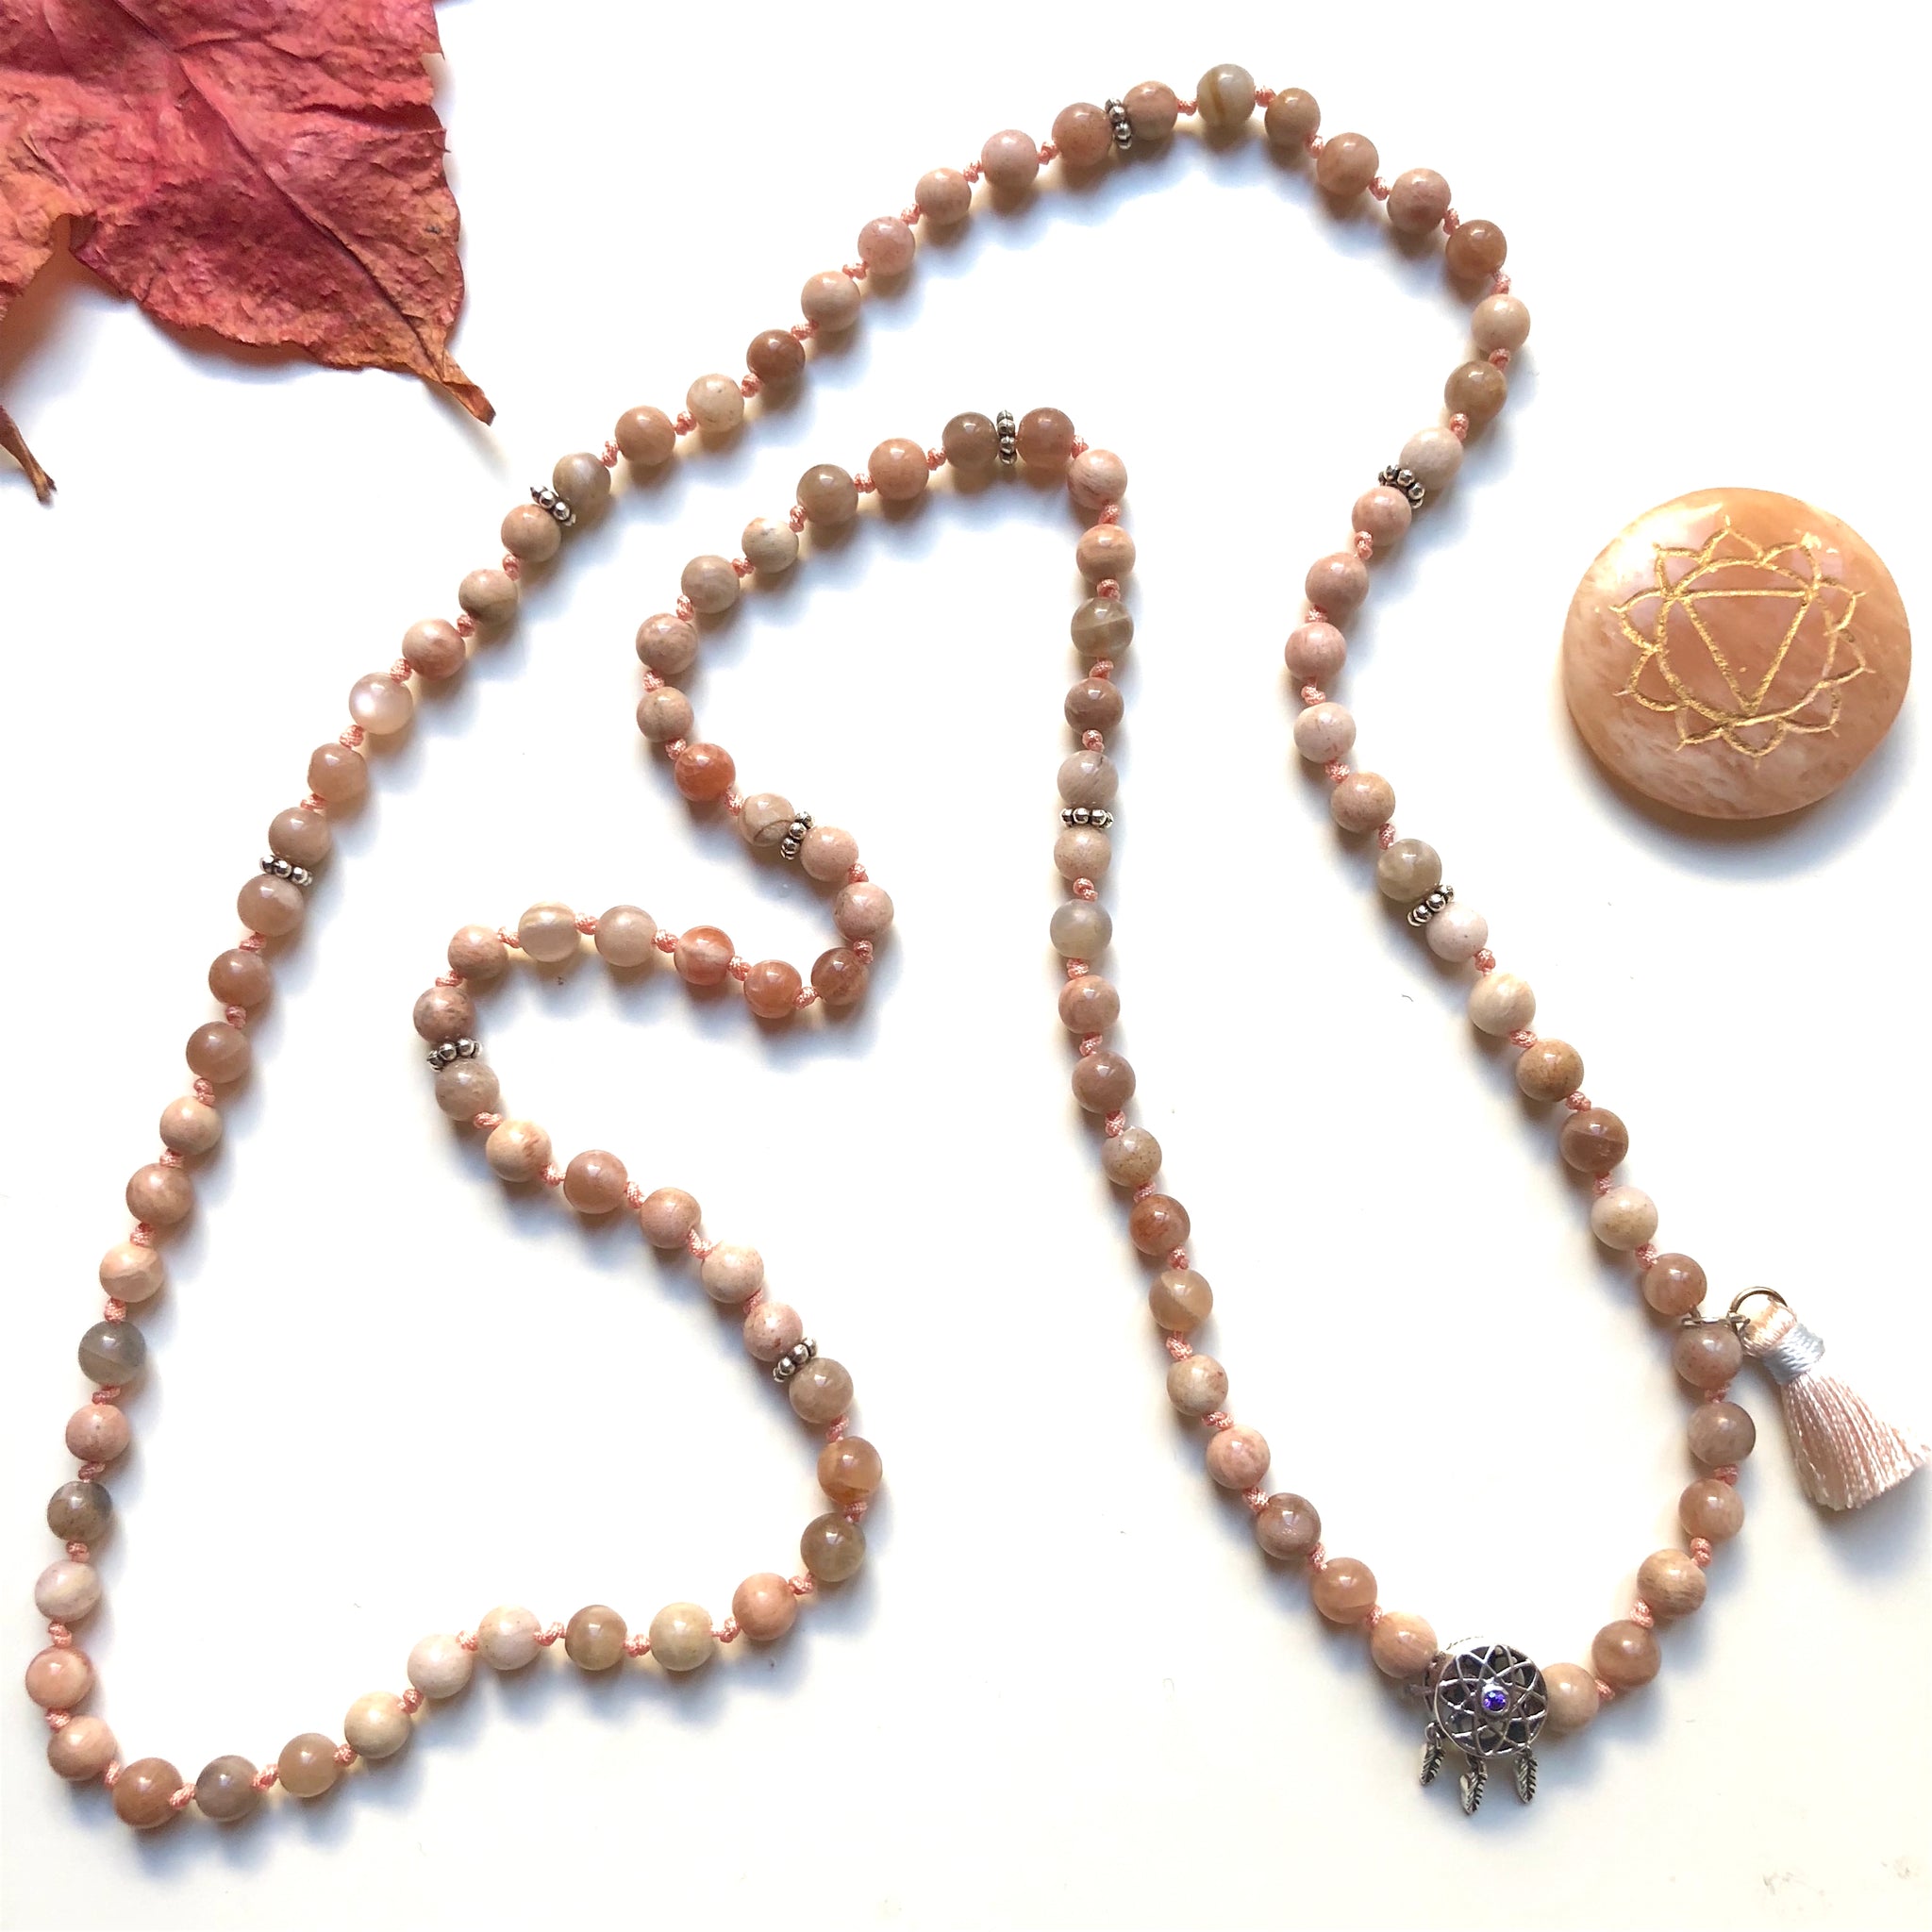 Aria Mala Atelier's unique one-of-a-kind feminine power Peach Moonstone gemstone meditation japa mala with sterling silver dream catcher charm is for yoga meditation empowering spiritual daily practise and intention setting